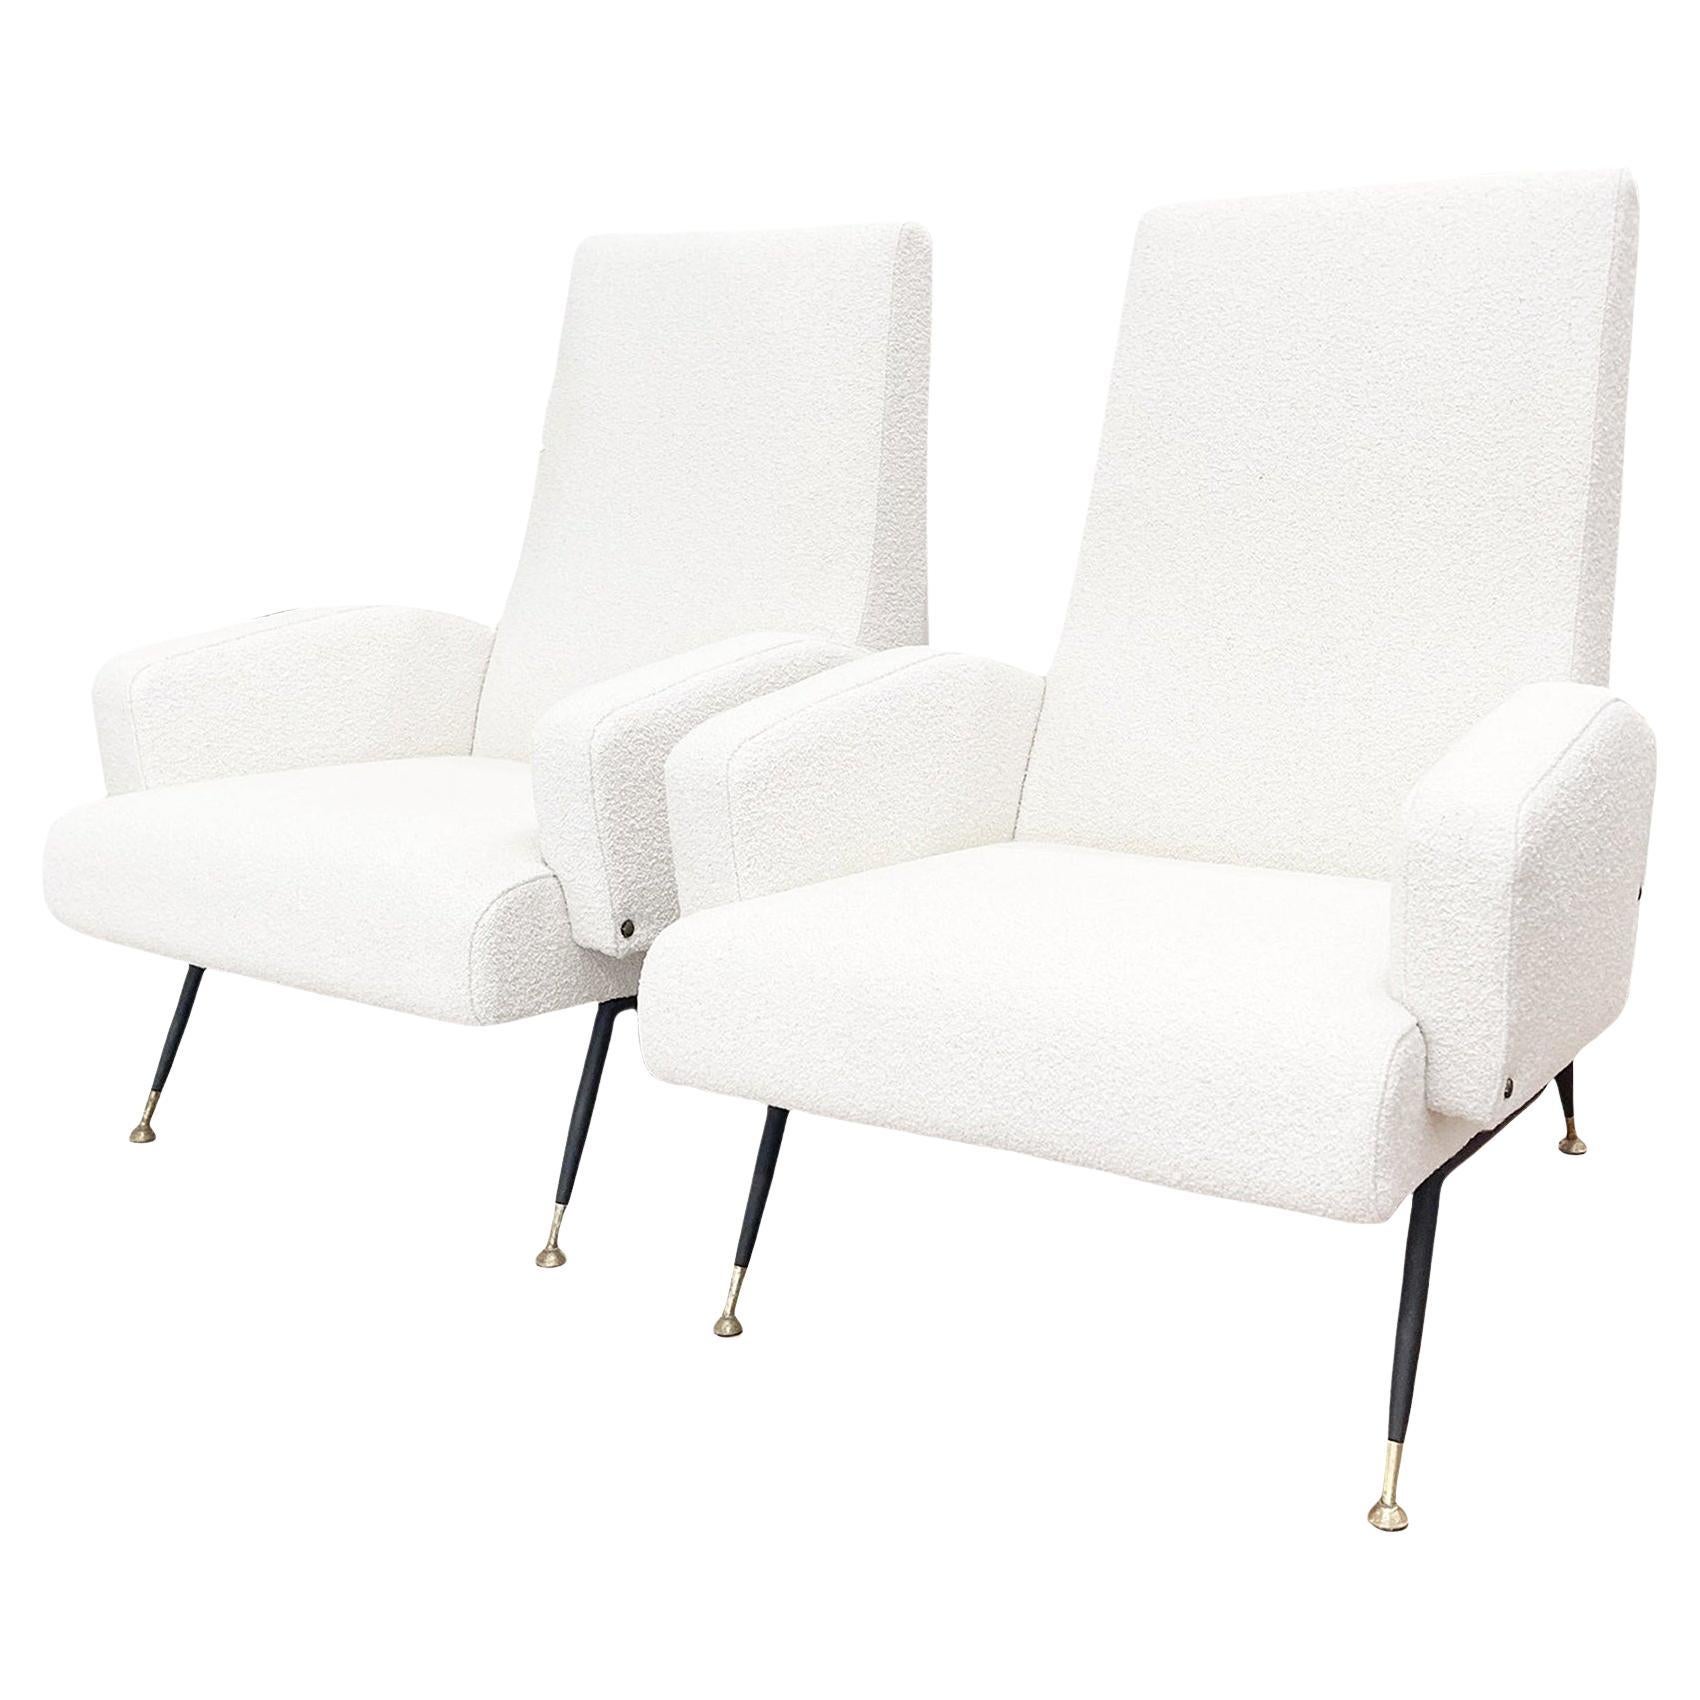 1950s Nino Zoncada Italian Lounge Chairs, Newly Upholstered in White Boucle For Sale